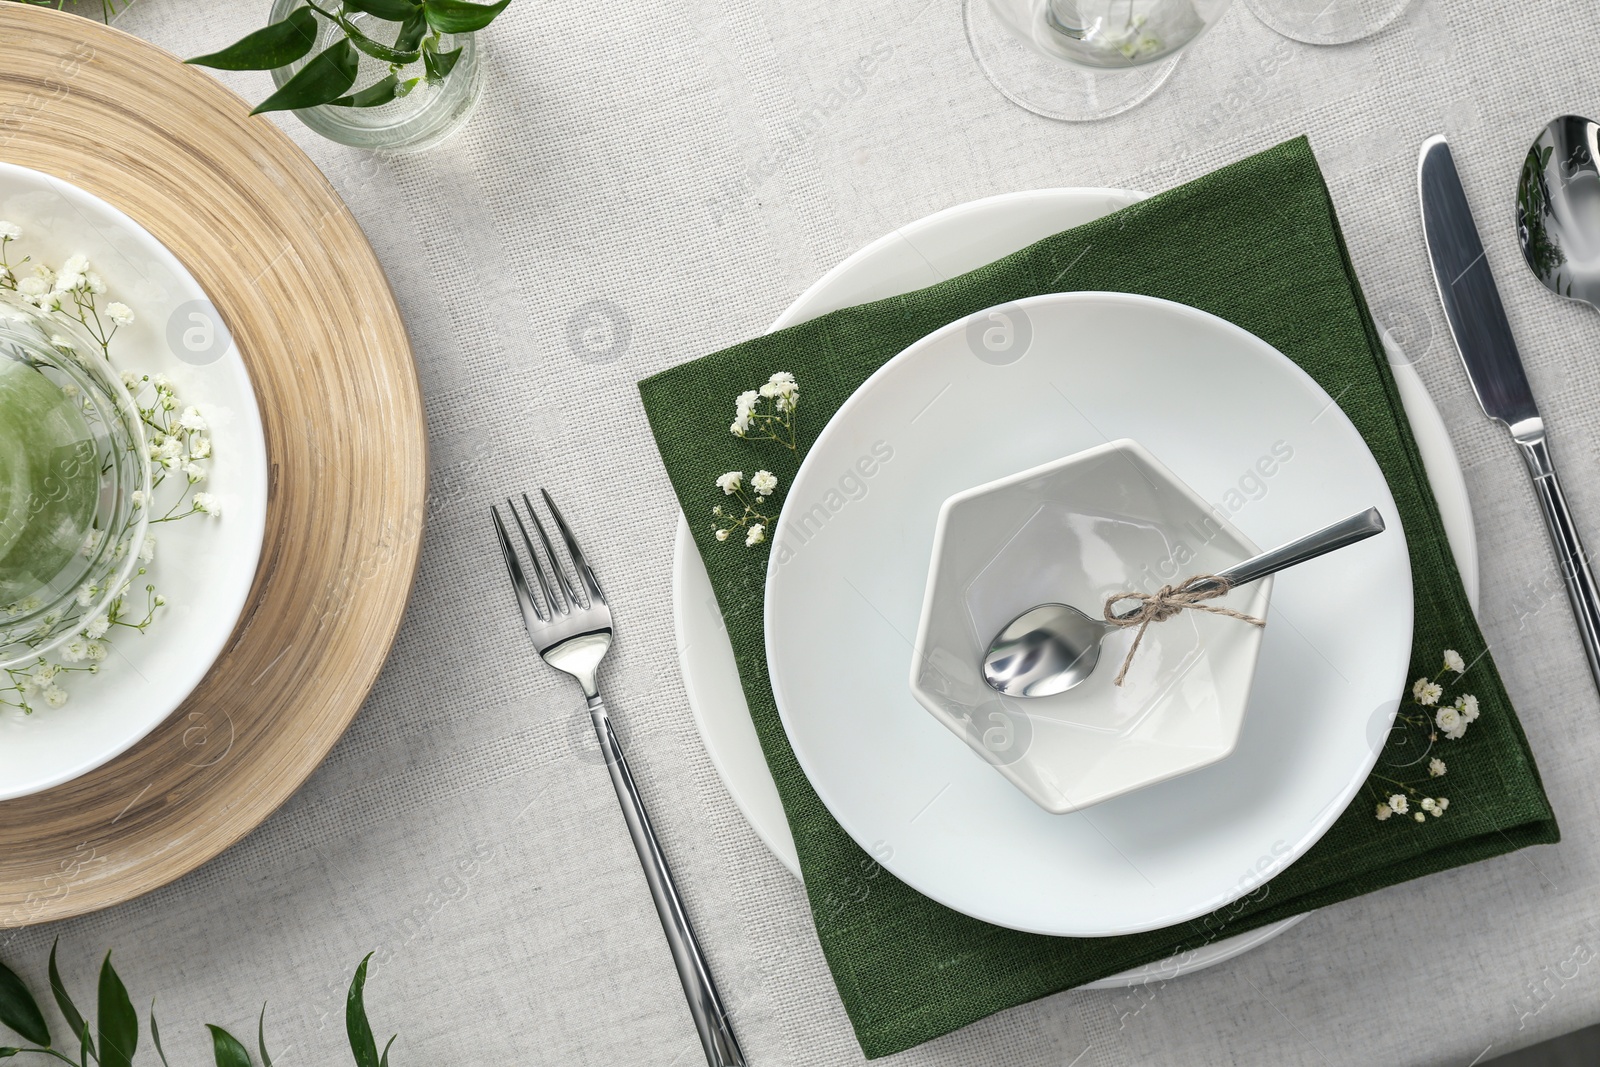 Photo of Elegant table setting with green plants on light cloth, flat lay